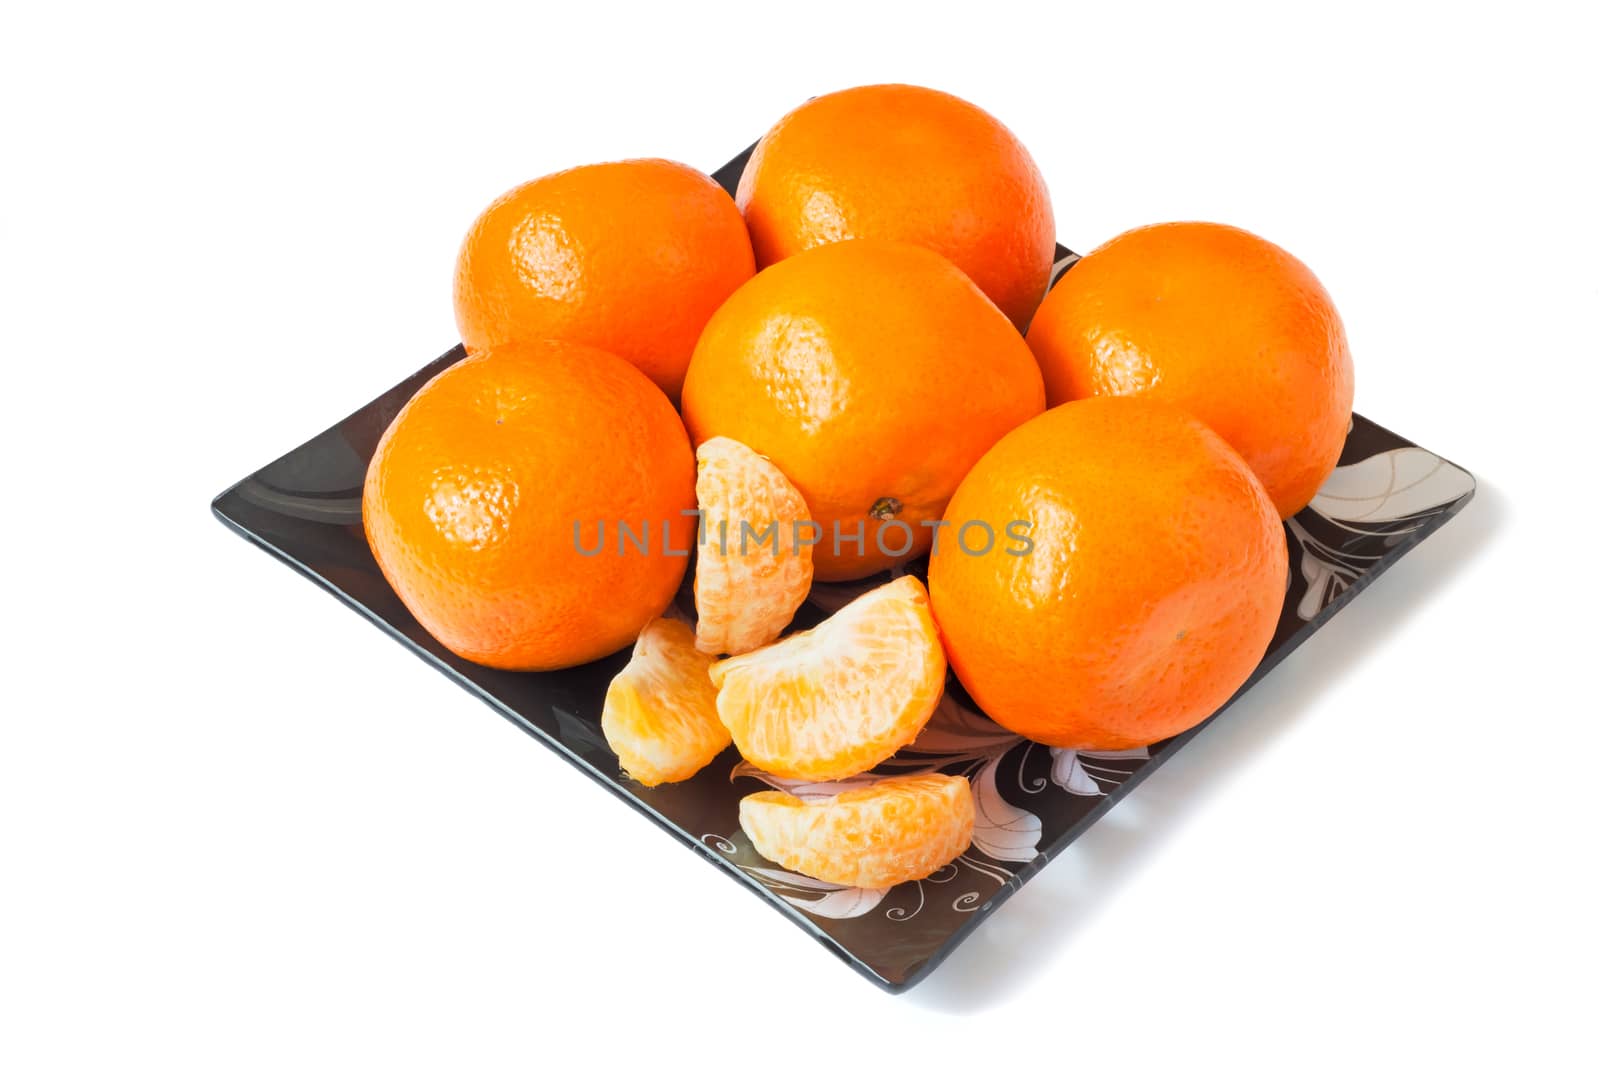 Large ripe oranges are located on a dish made of dark glass with by georgina198